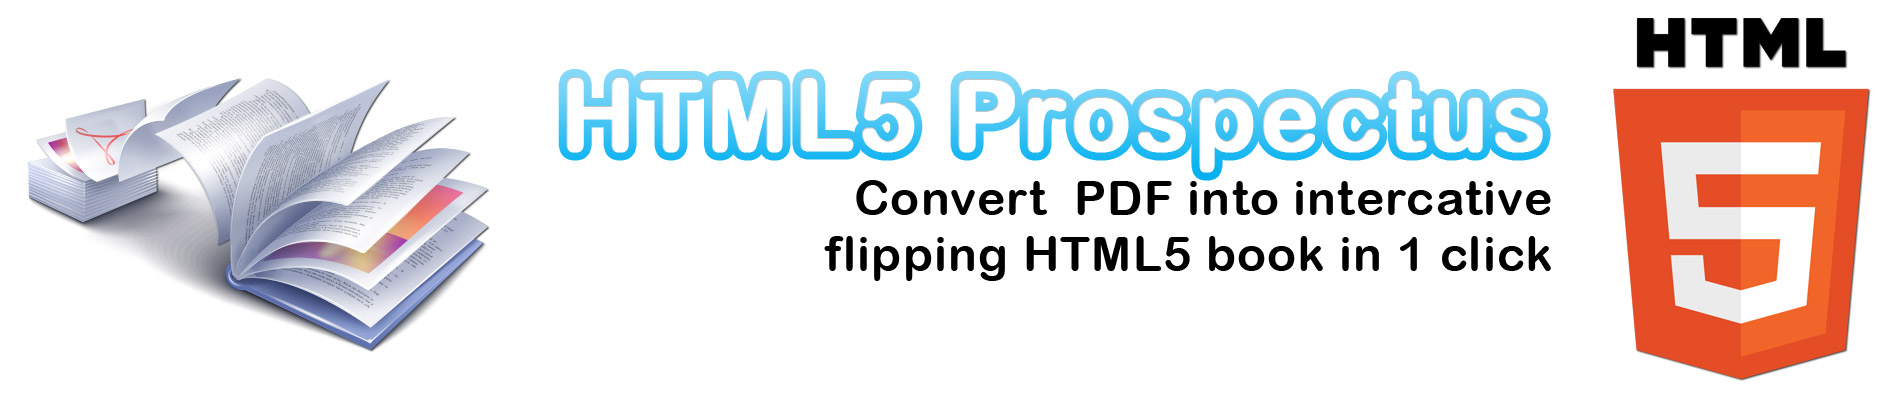 Flipping interactive HTML5 book